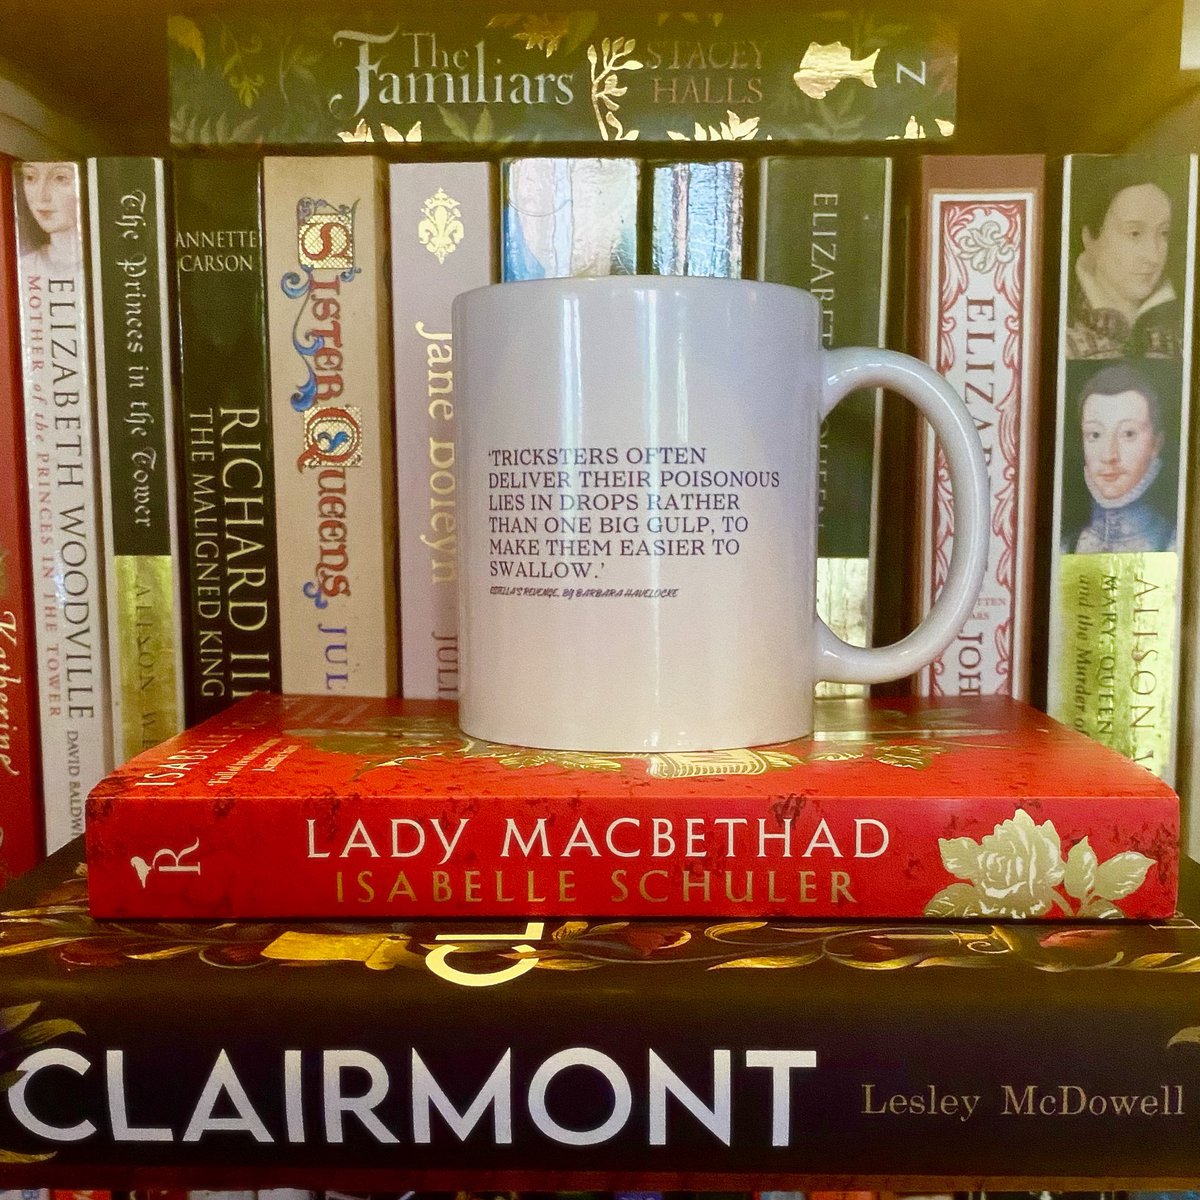 My latest book purchases: Lady Macbethad, by @BelleSchuler , and Clairmont, by @LesleyMcDowell1 . Two powerful novels about real women. I’m really looking forward to reading these! What was the last book you bought? #readingcommunity